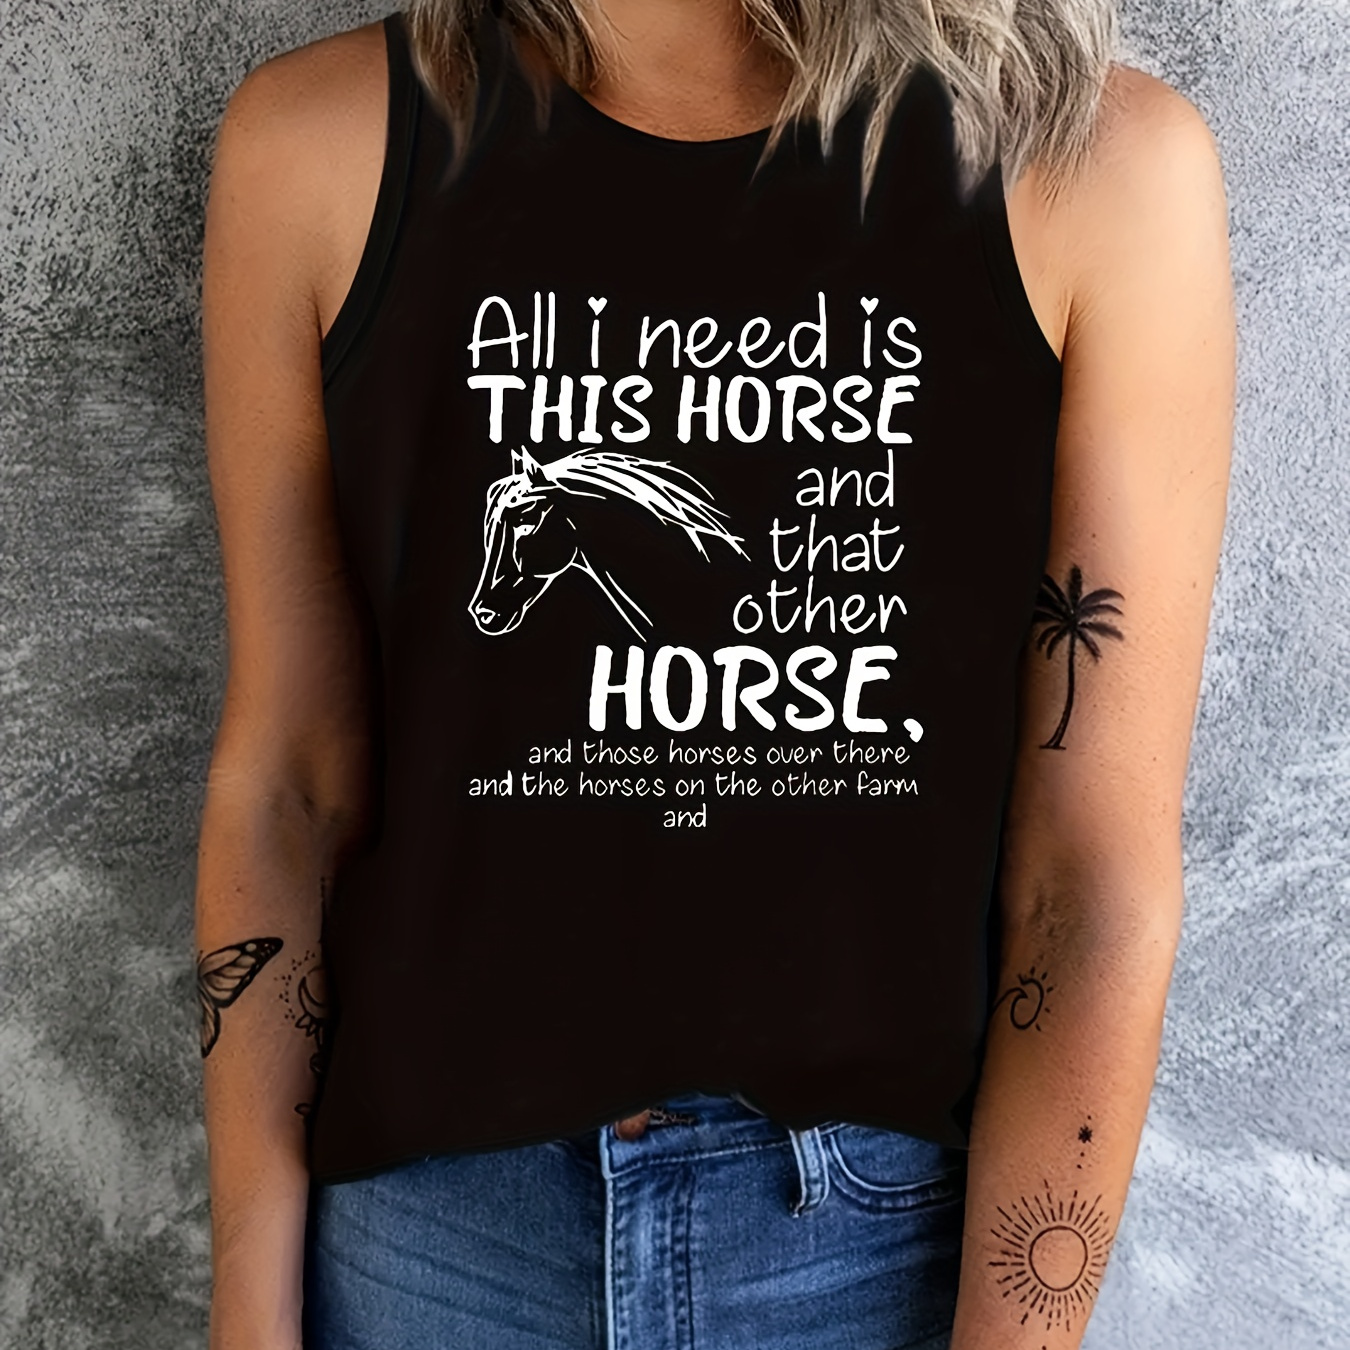 

Women's Casual Sleeveless Tank Top With Horse Graphic And Slogan Print, Breathable Comfort Fit, Summer Sportswear Style